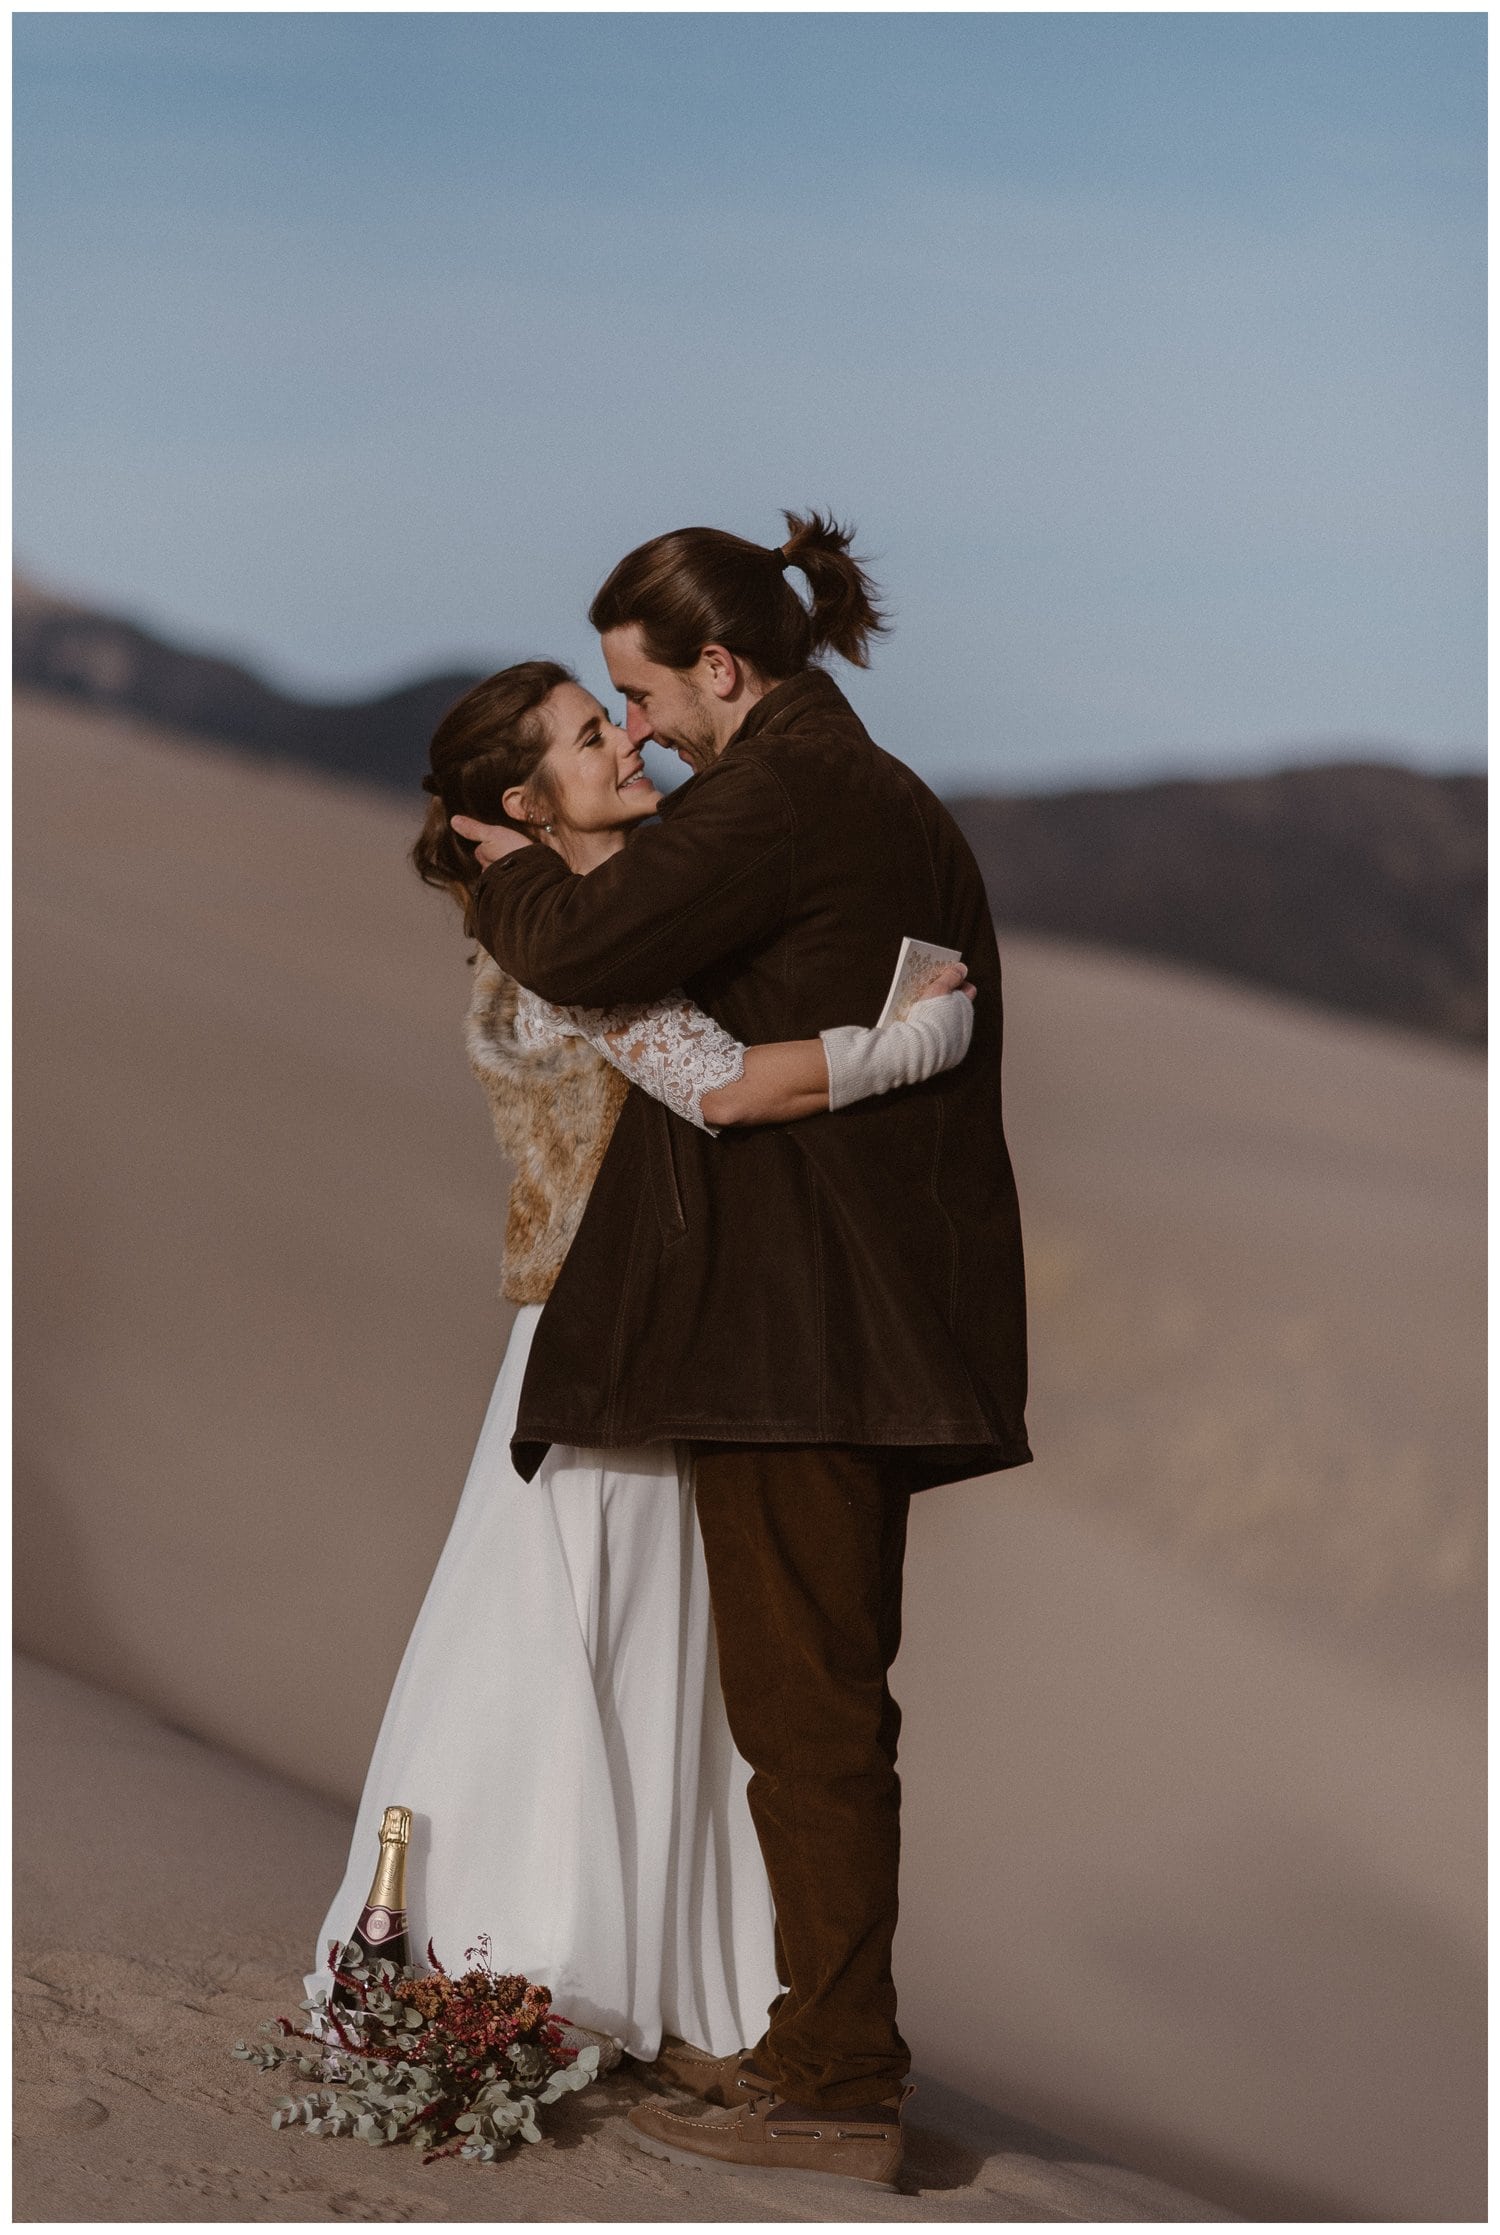 Bride and groom embrace at Great Sand Dunes National Park.